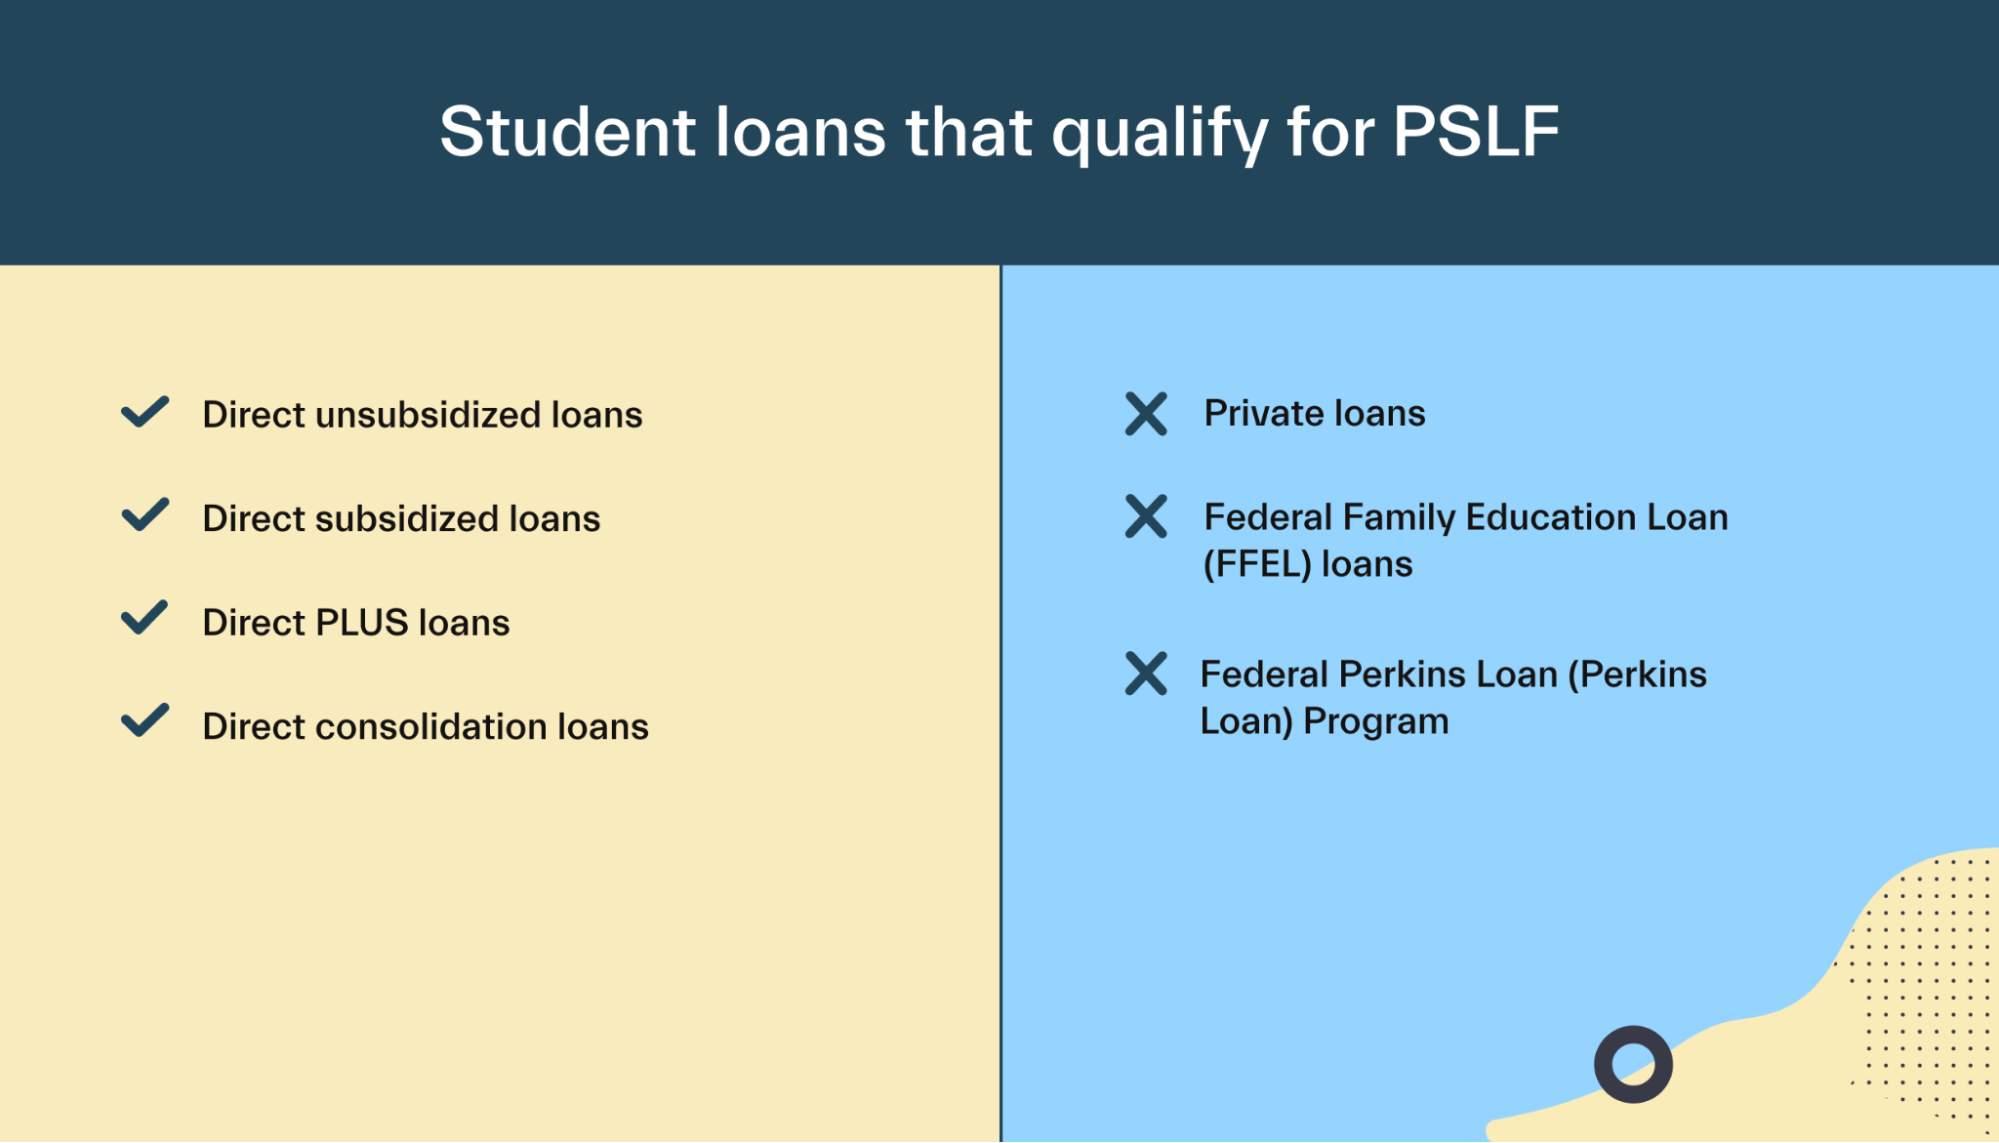 Student Loans That Qualify for PSLF